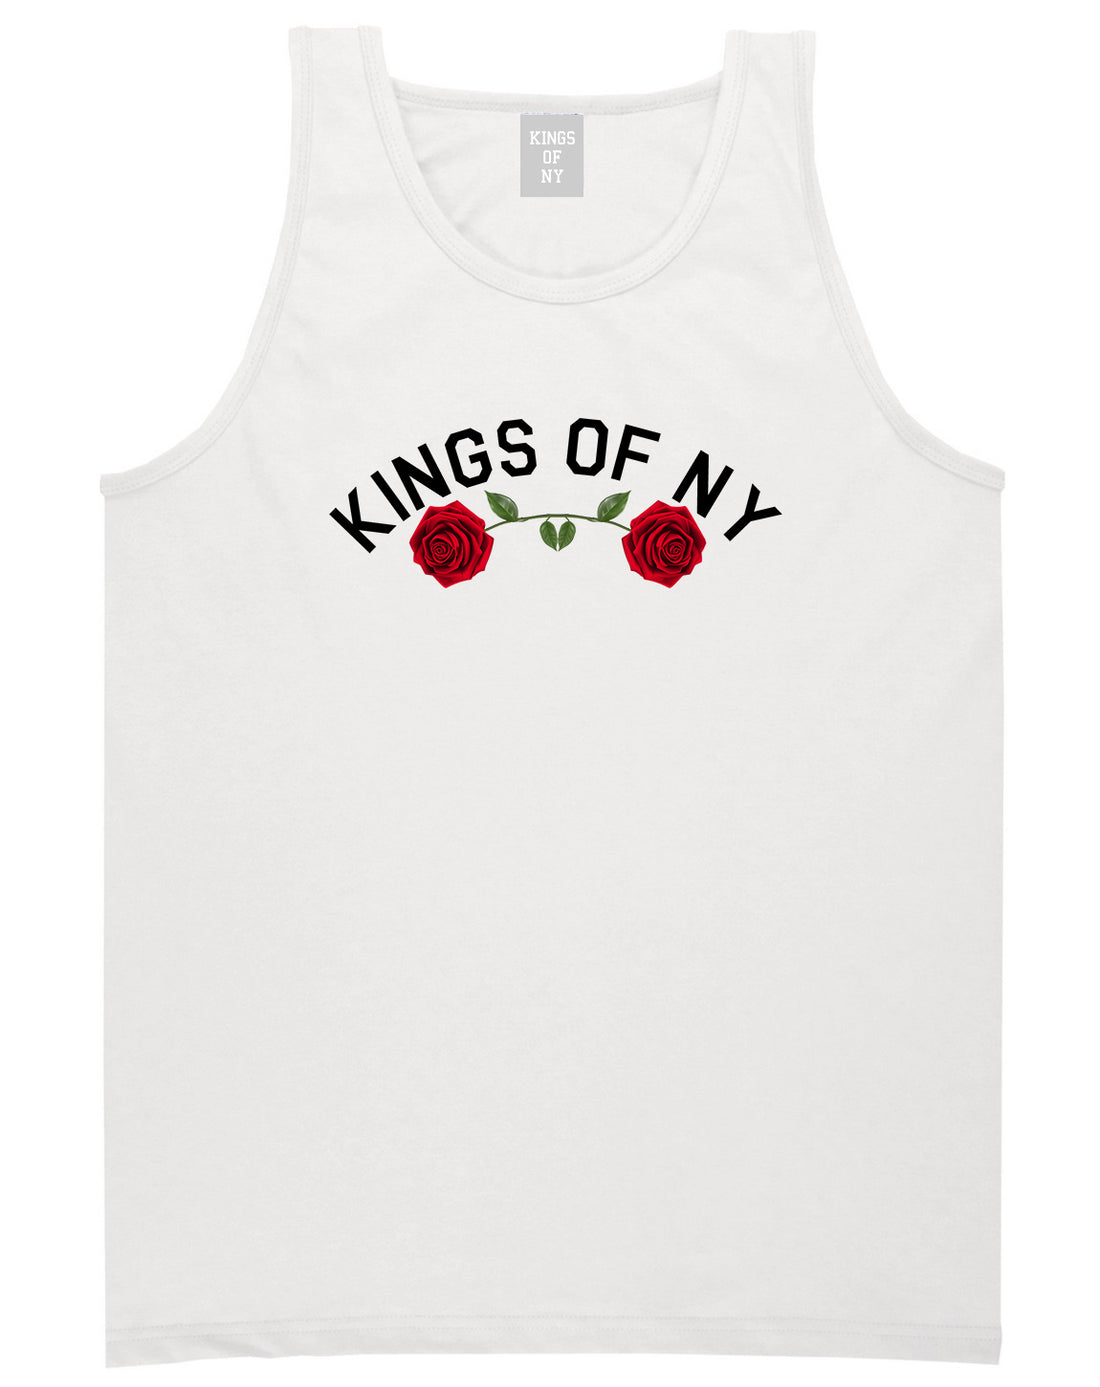 Red Roses Crest KONY Tank Top Shirt in White